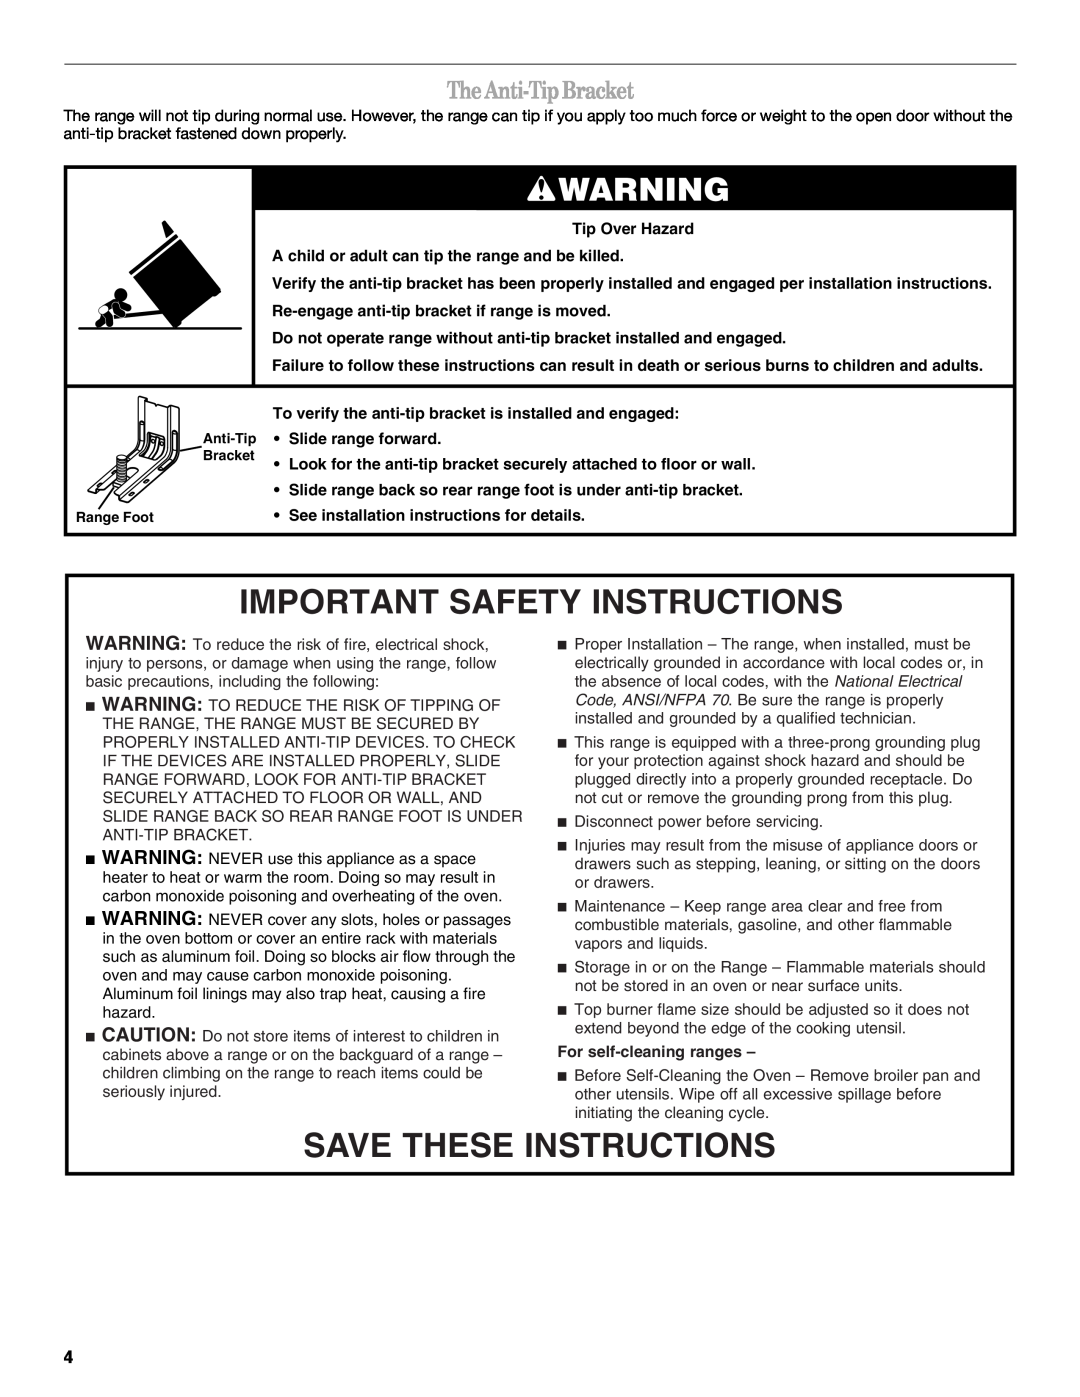 Amana W10452012A manual The Anti-TipBracket, Important Safety Instructions, Save These Instructions 